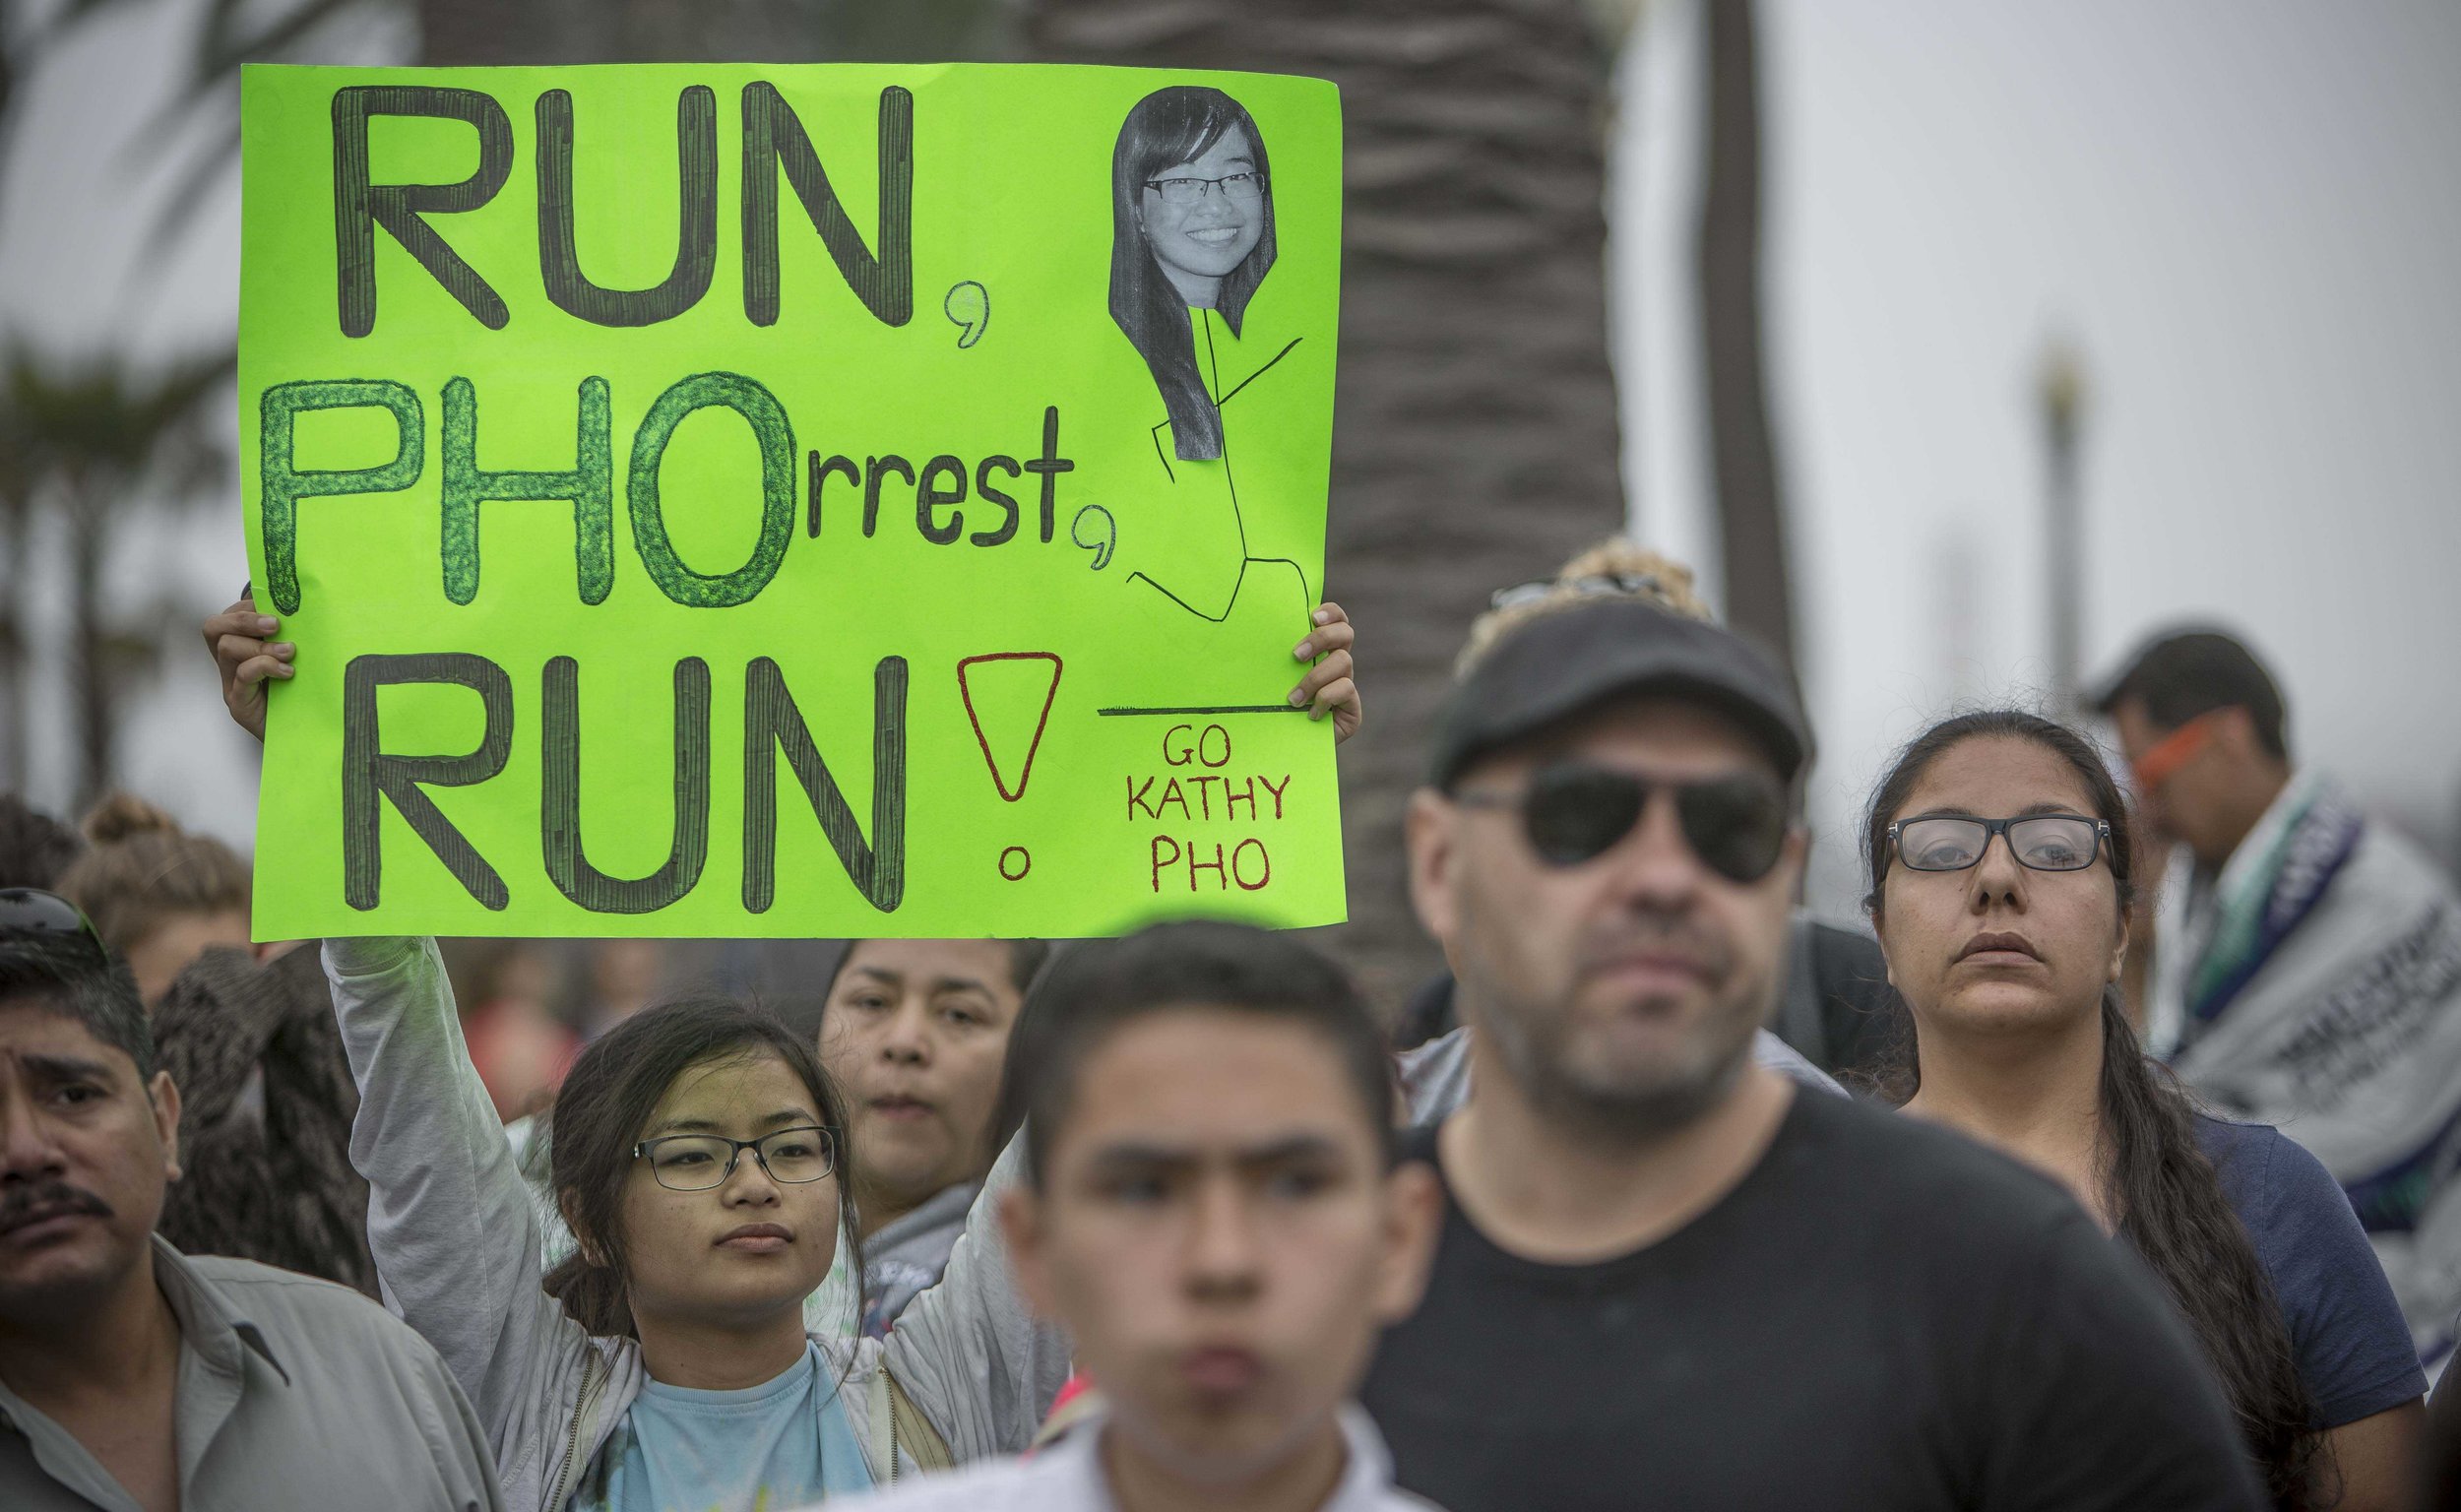  March 19, 2017. Katrina Pho holds up a sign waiting for her sister Kathy Pho to cross the finish line during the LA Marathon in Santa Monica, California. Daniel Bowyer 